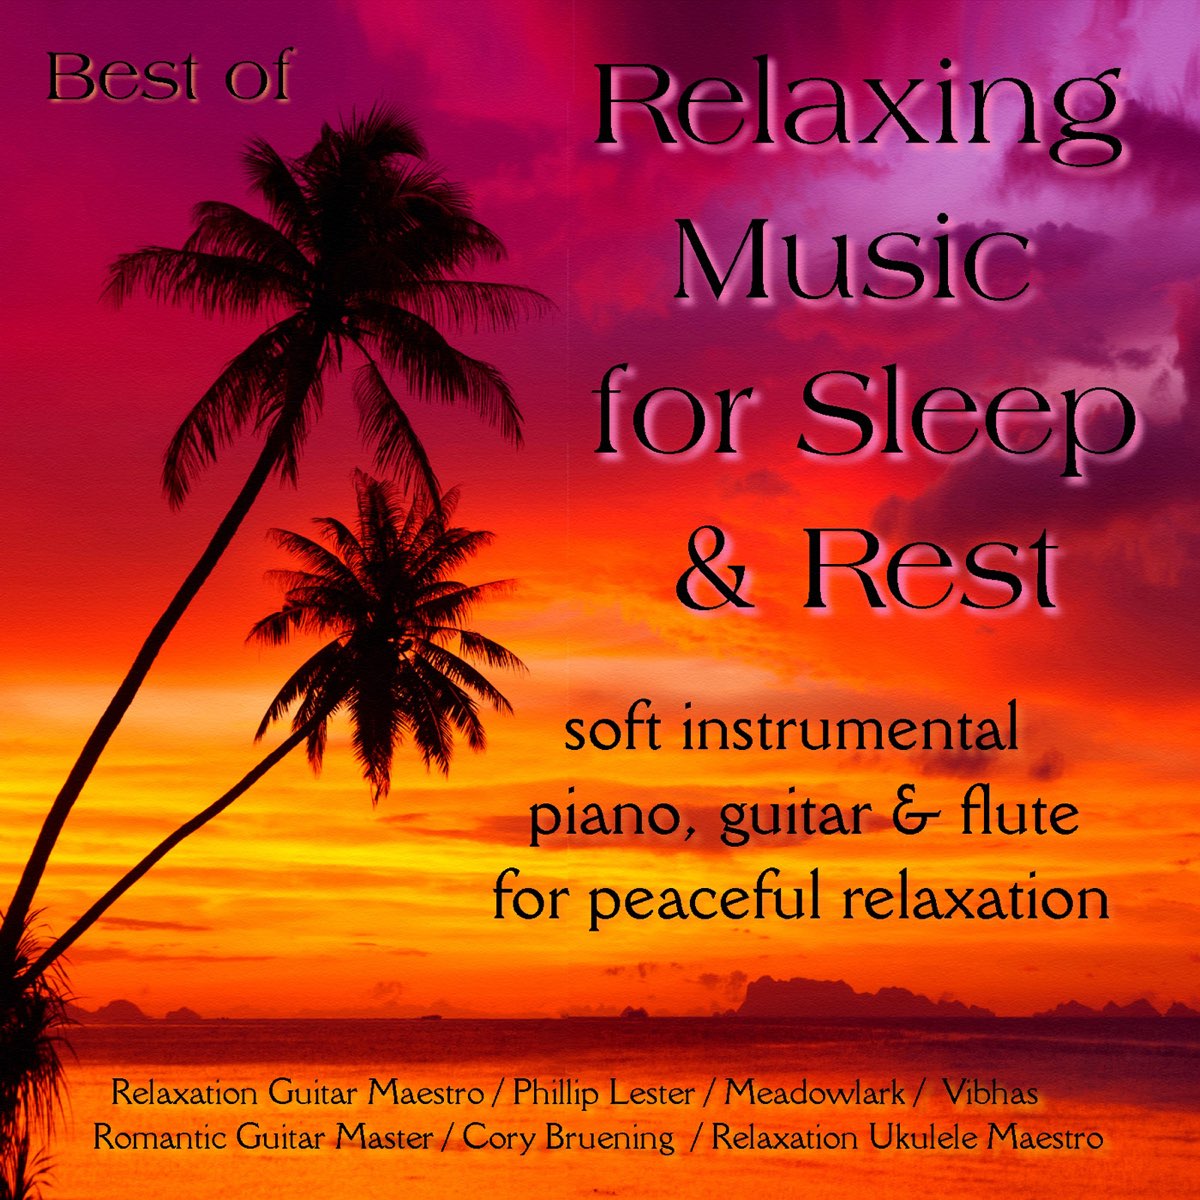 Soft Instrumental Music playing. Best Relaxation Music.